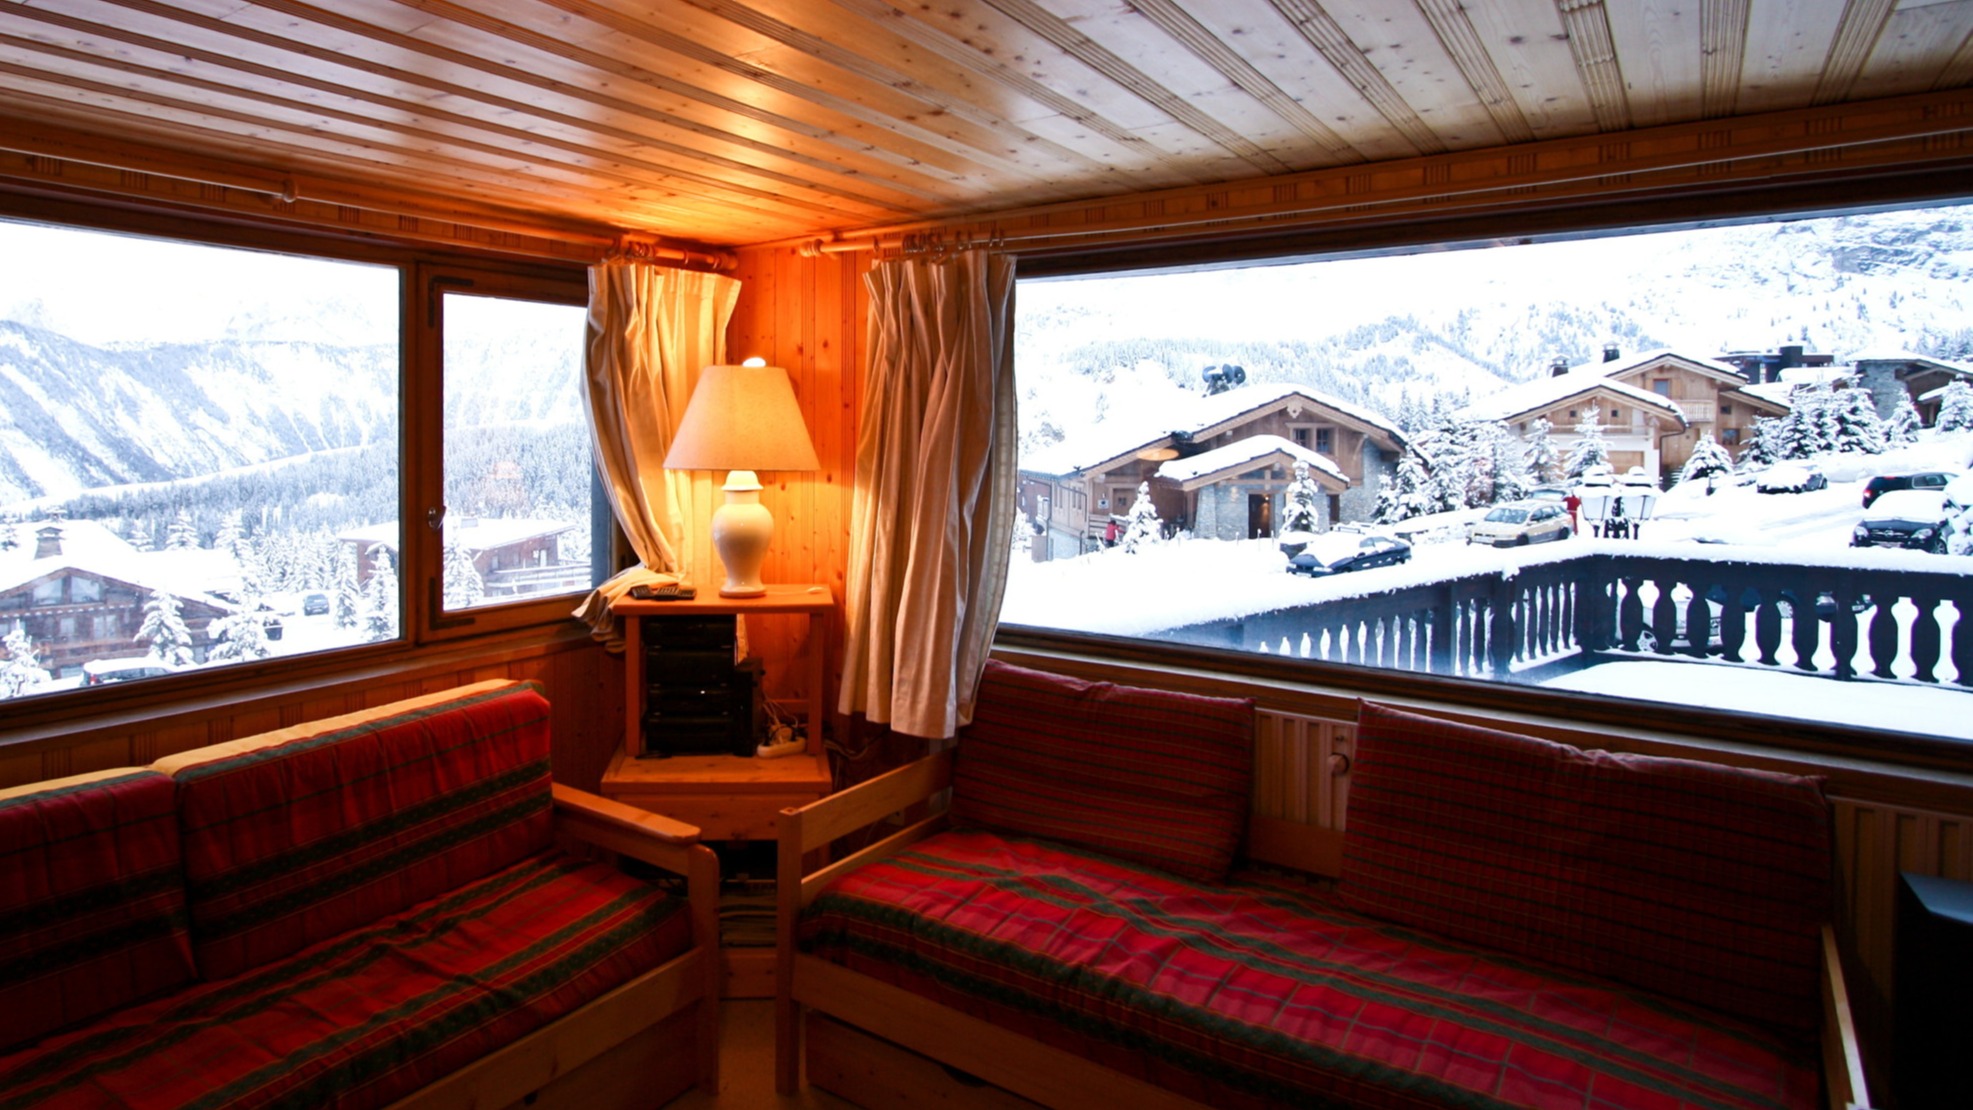 Rich People's Problems: Should I sell my alpine ski apartment?